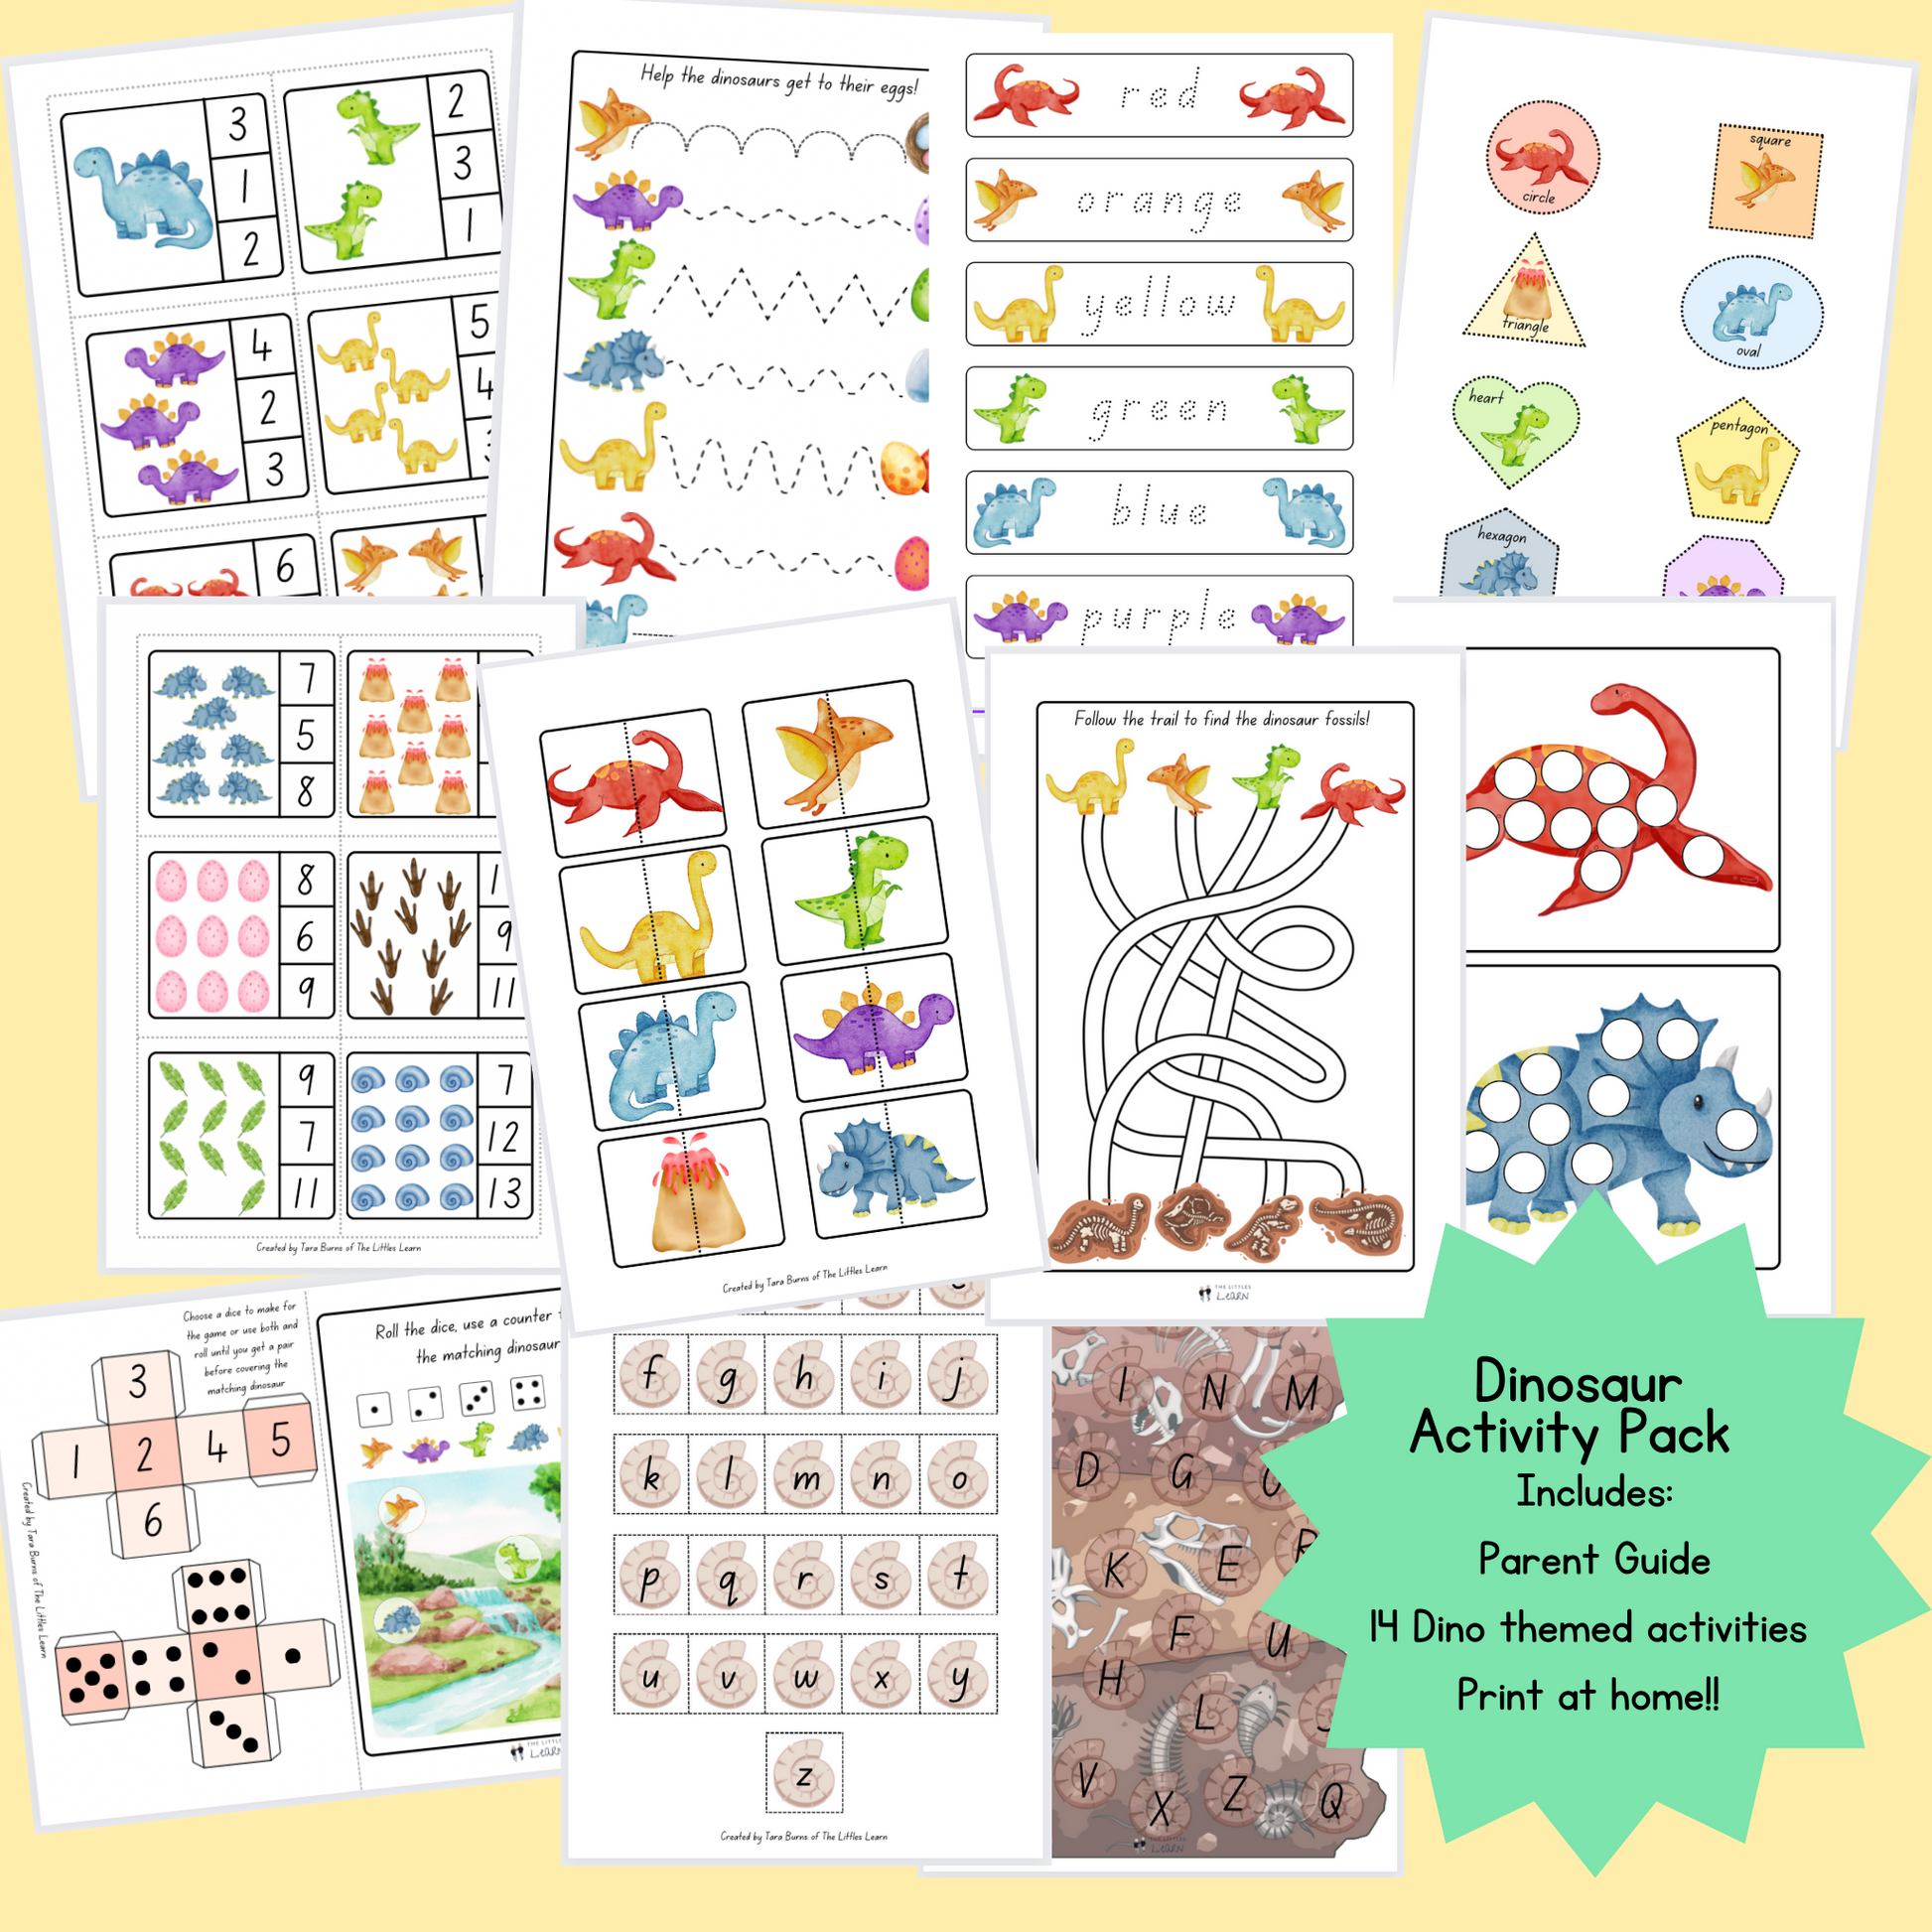 Colourful dinosaur printable activity pack for children featuring alphabet number, colour and colouring activities for kids.